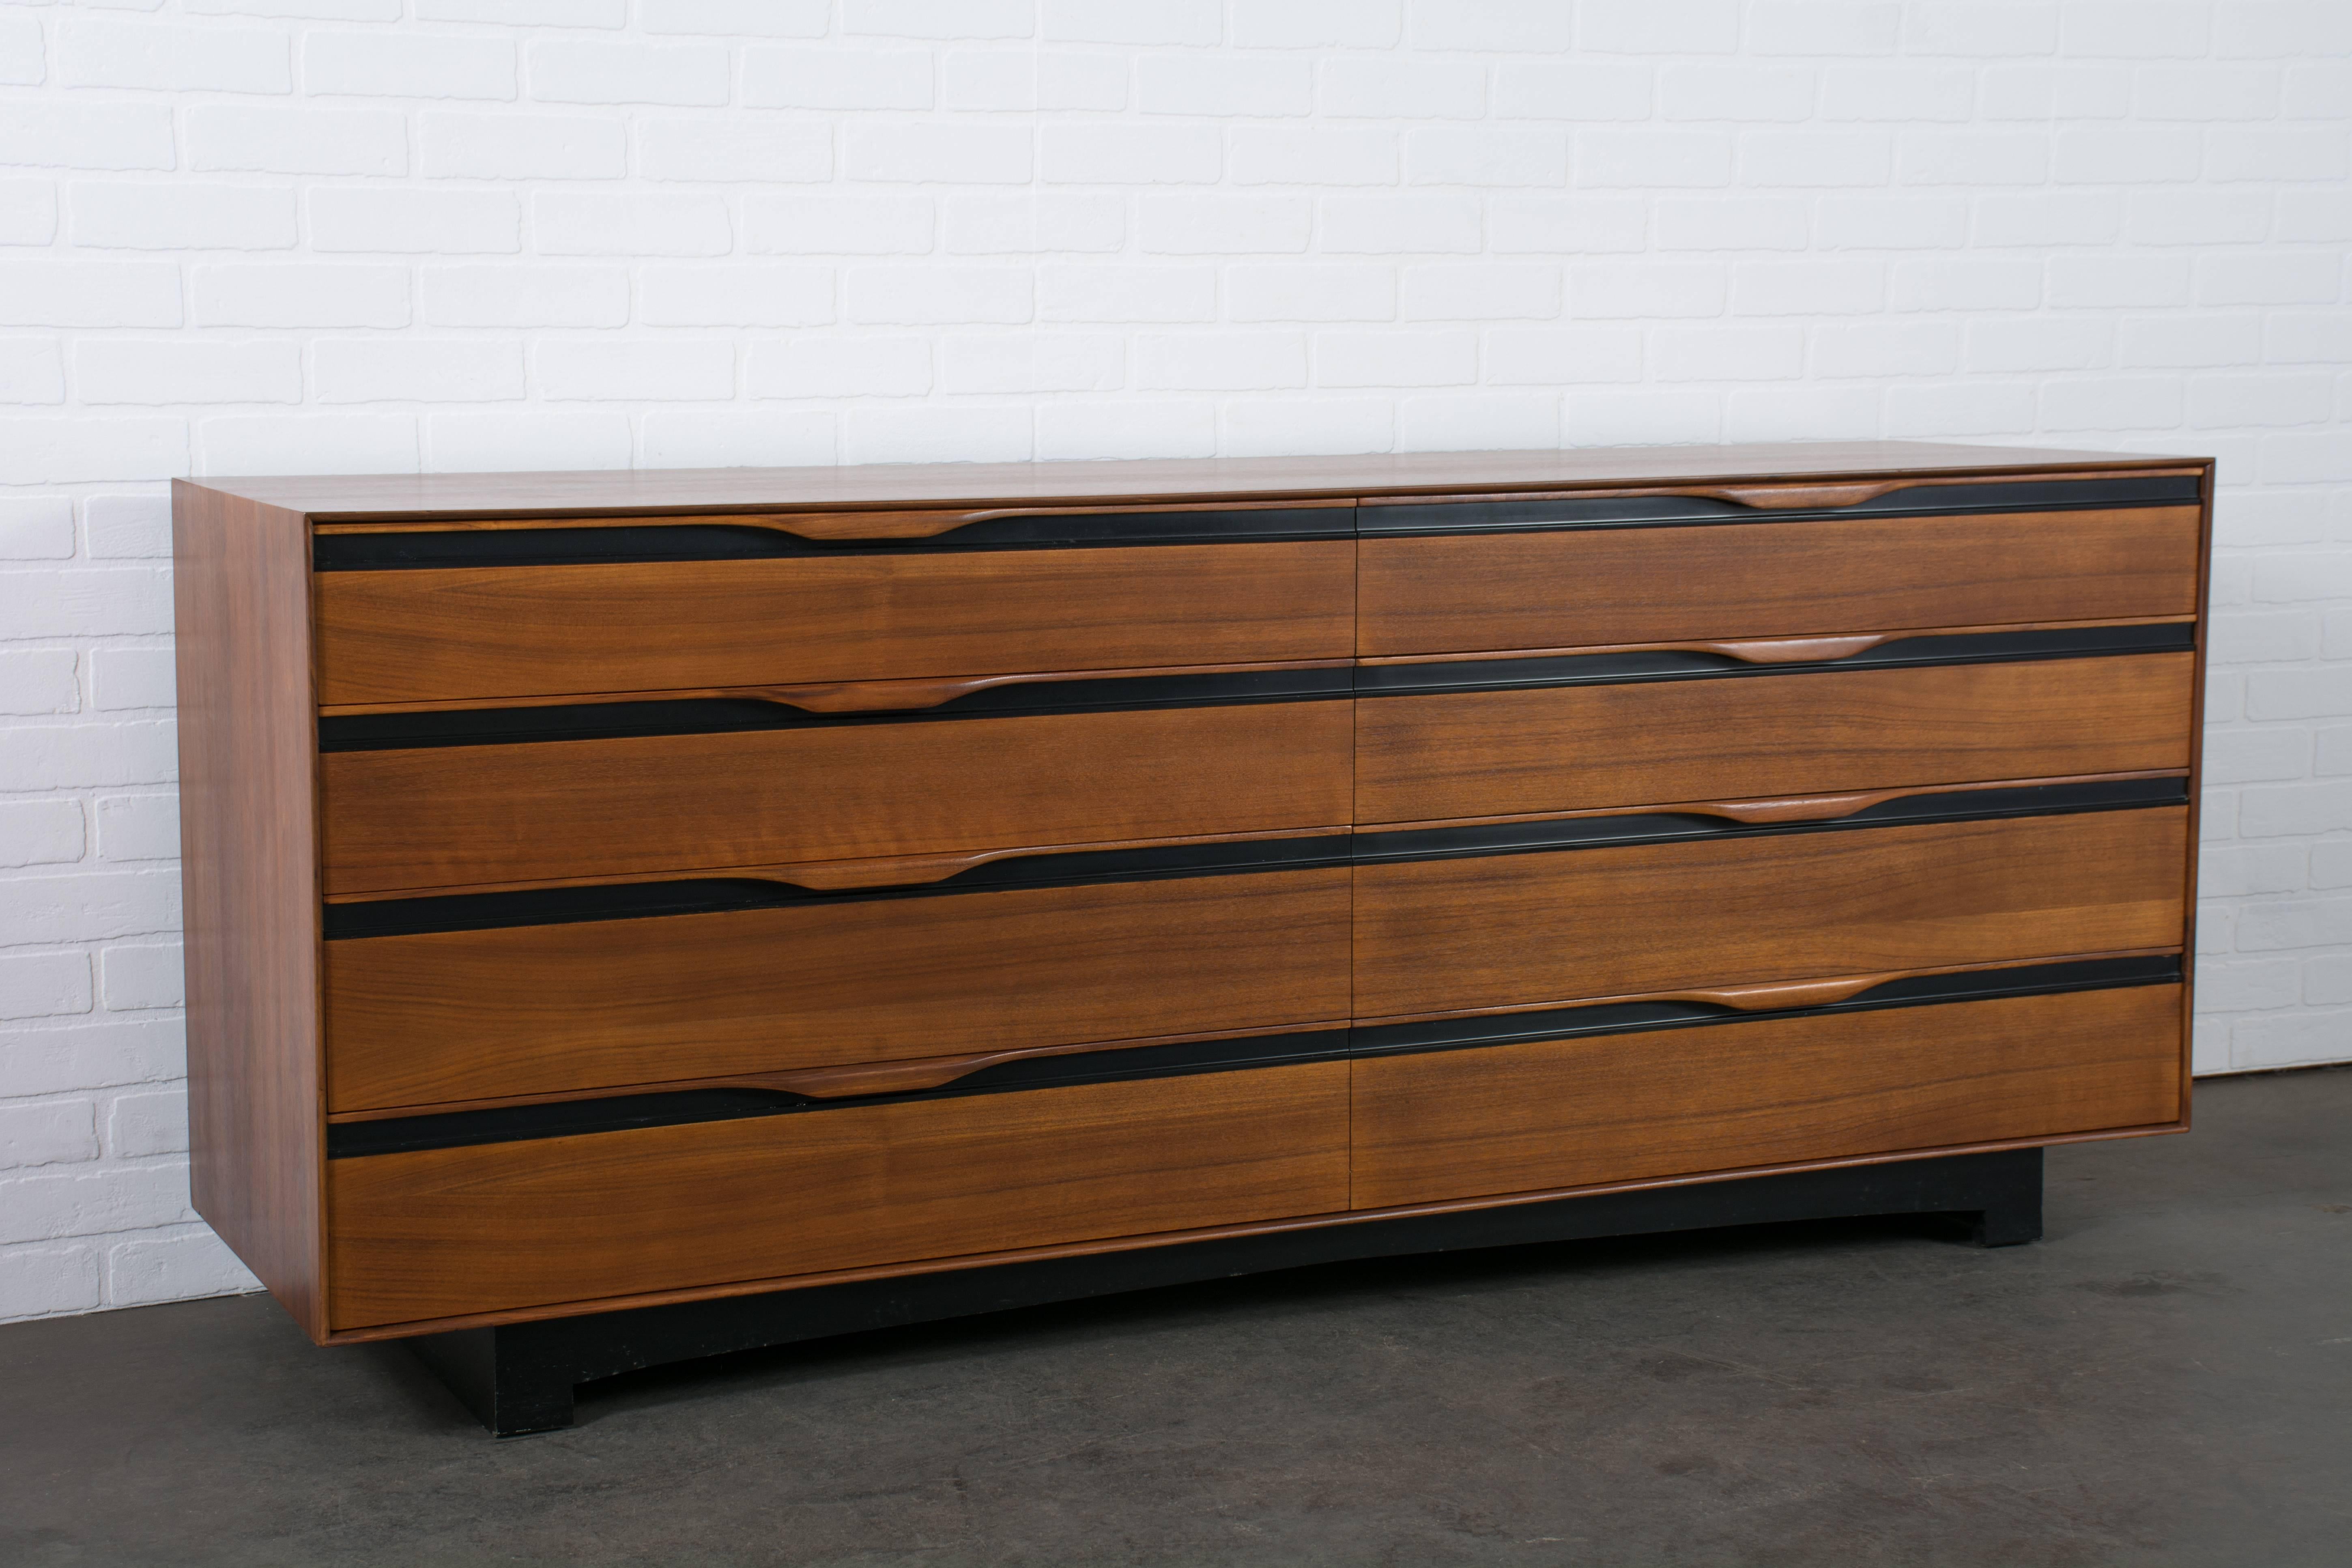 This Mid-Century Modern eight-drawer dresser was designed by John Kapel for Glenn of California in the 1960s. It is walnut with black accents and sculptural handles. Includes many adjustable dividers for the drawers. Matching nightstands available